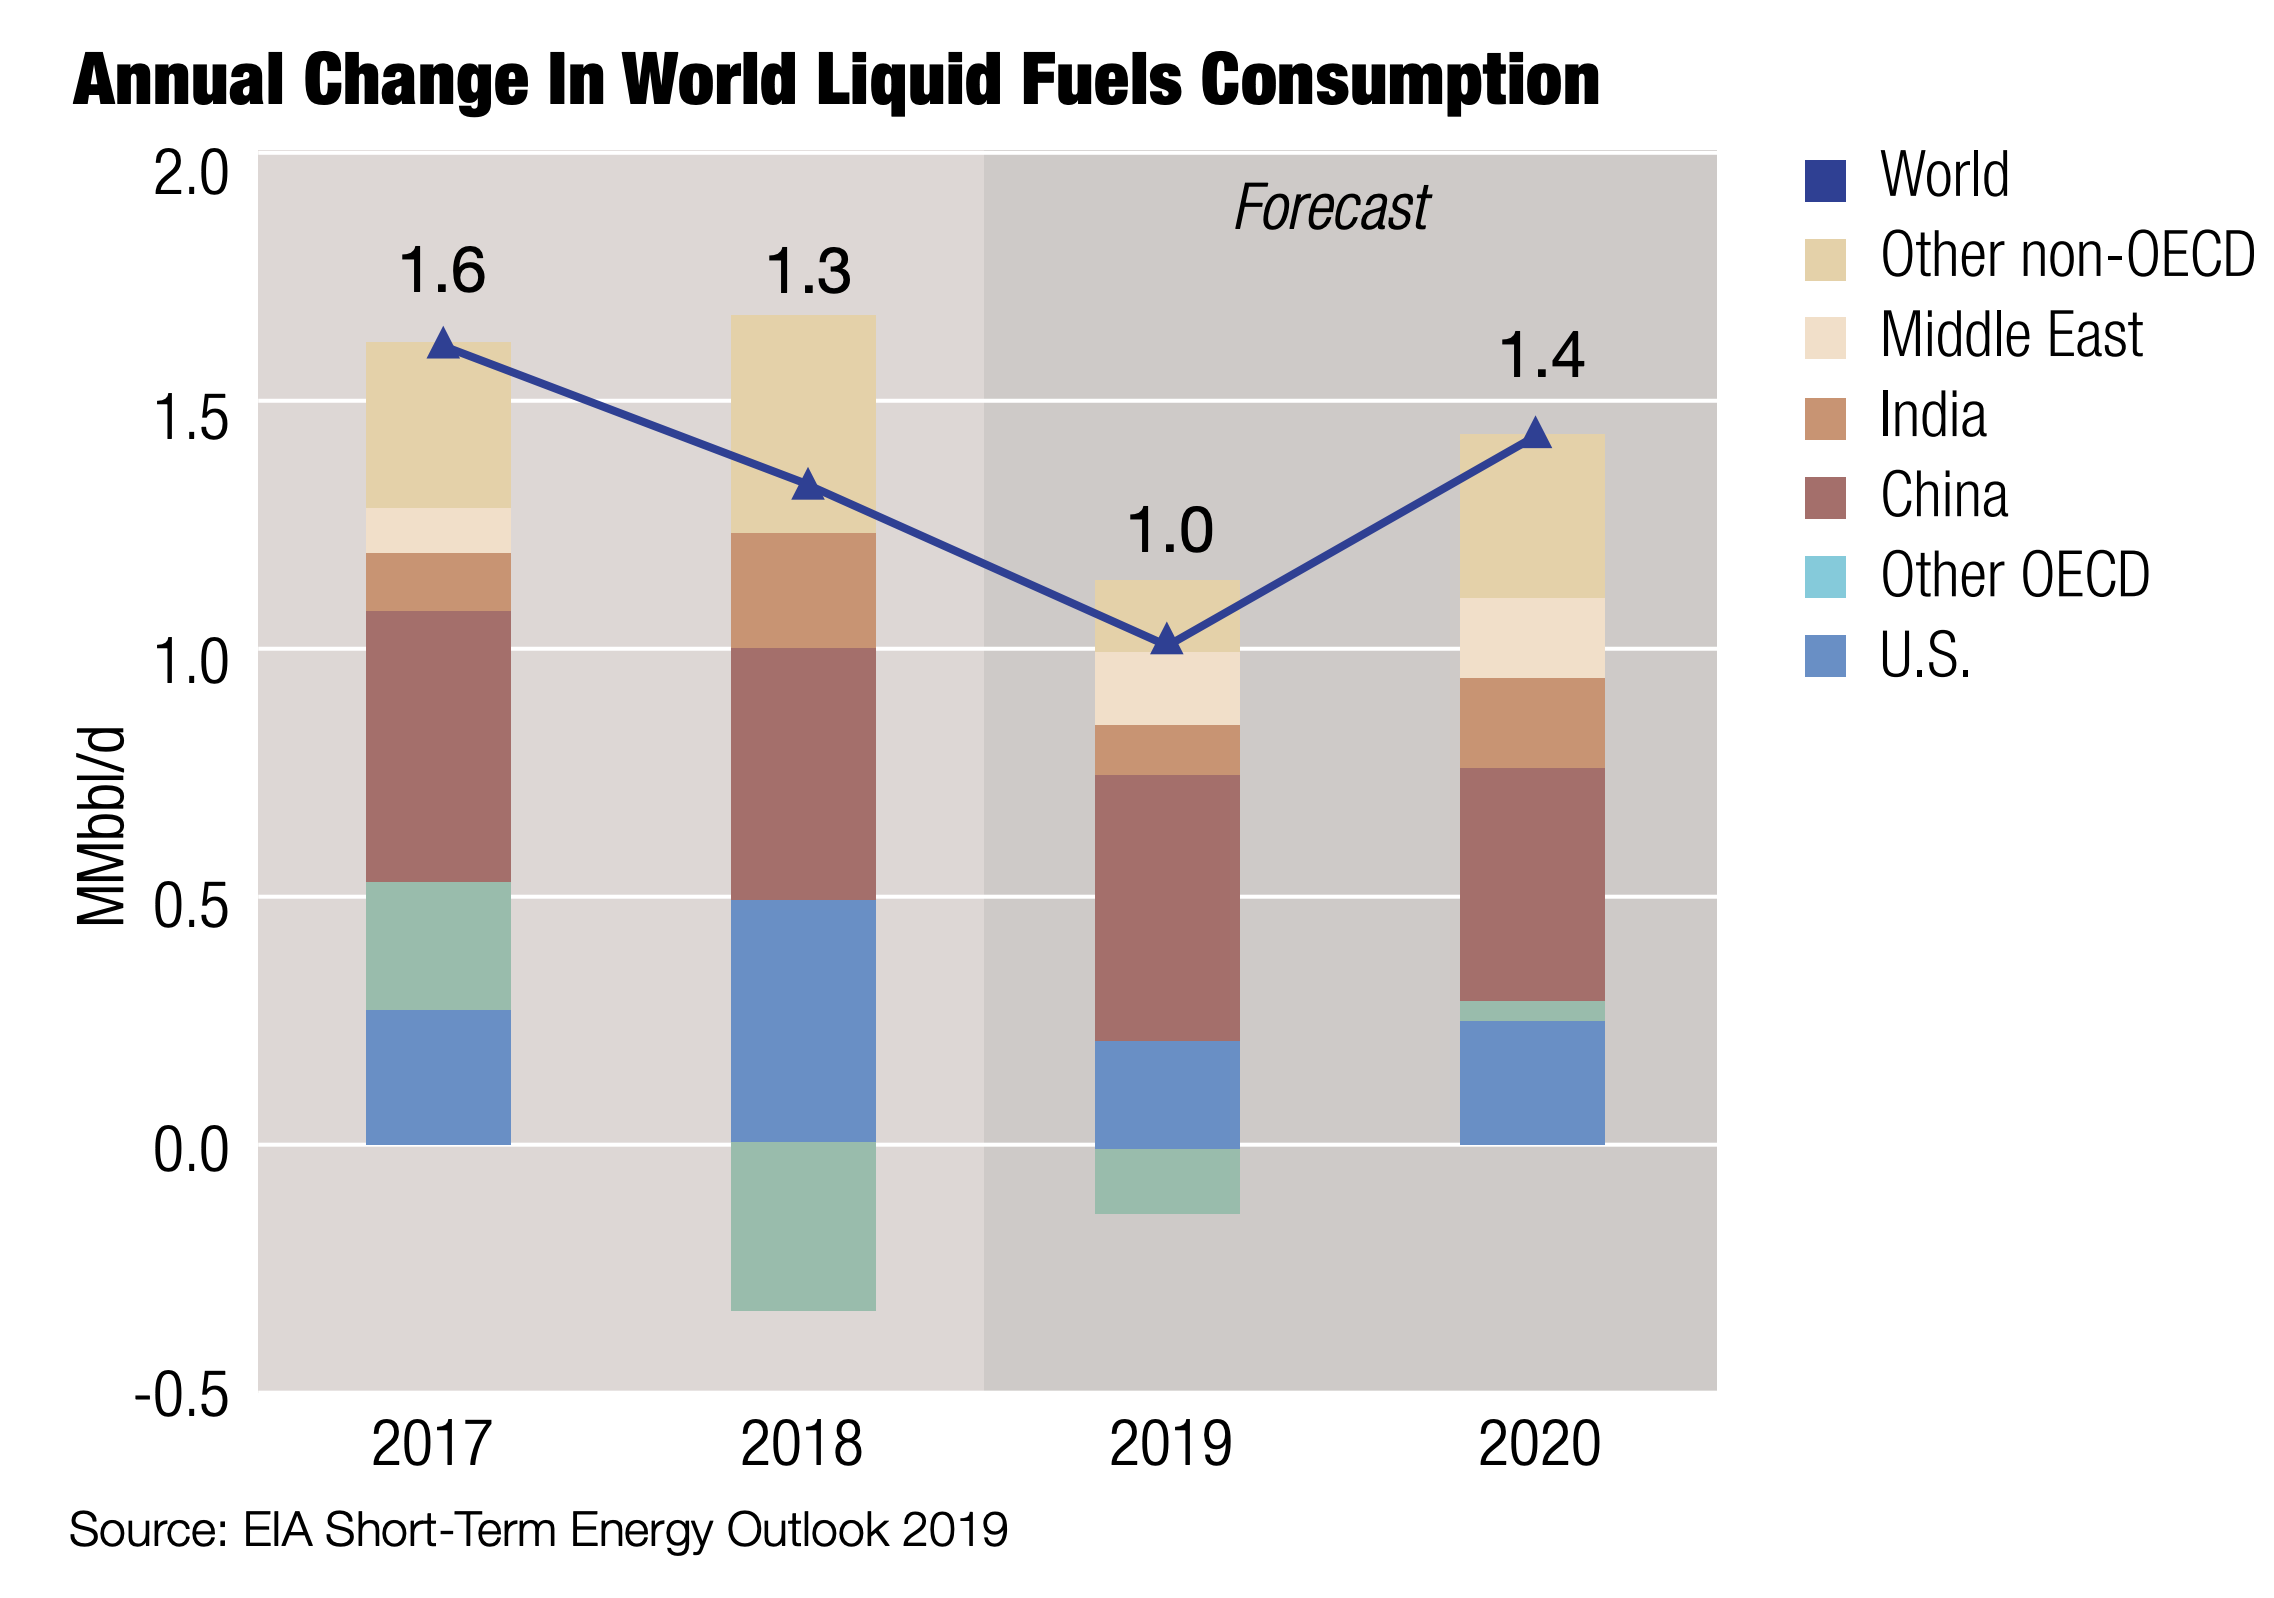 Annual Change In World Liquid Fuels Consumption (Source: EIA Short-Term Energy Outlook 2019)